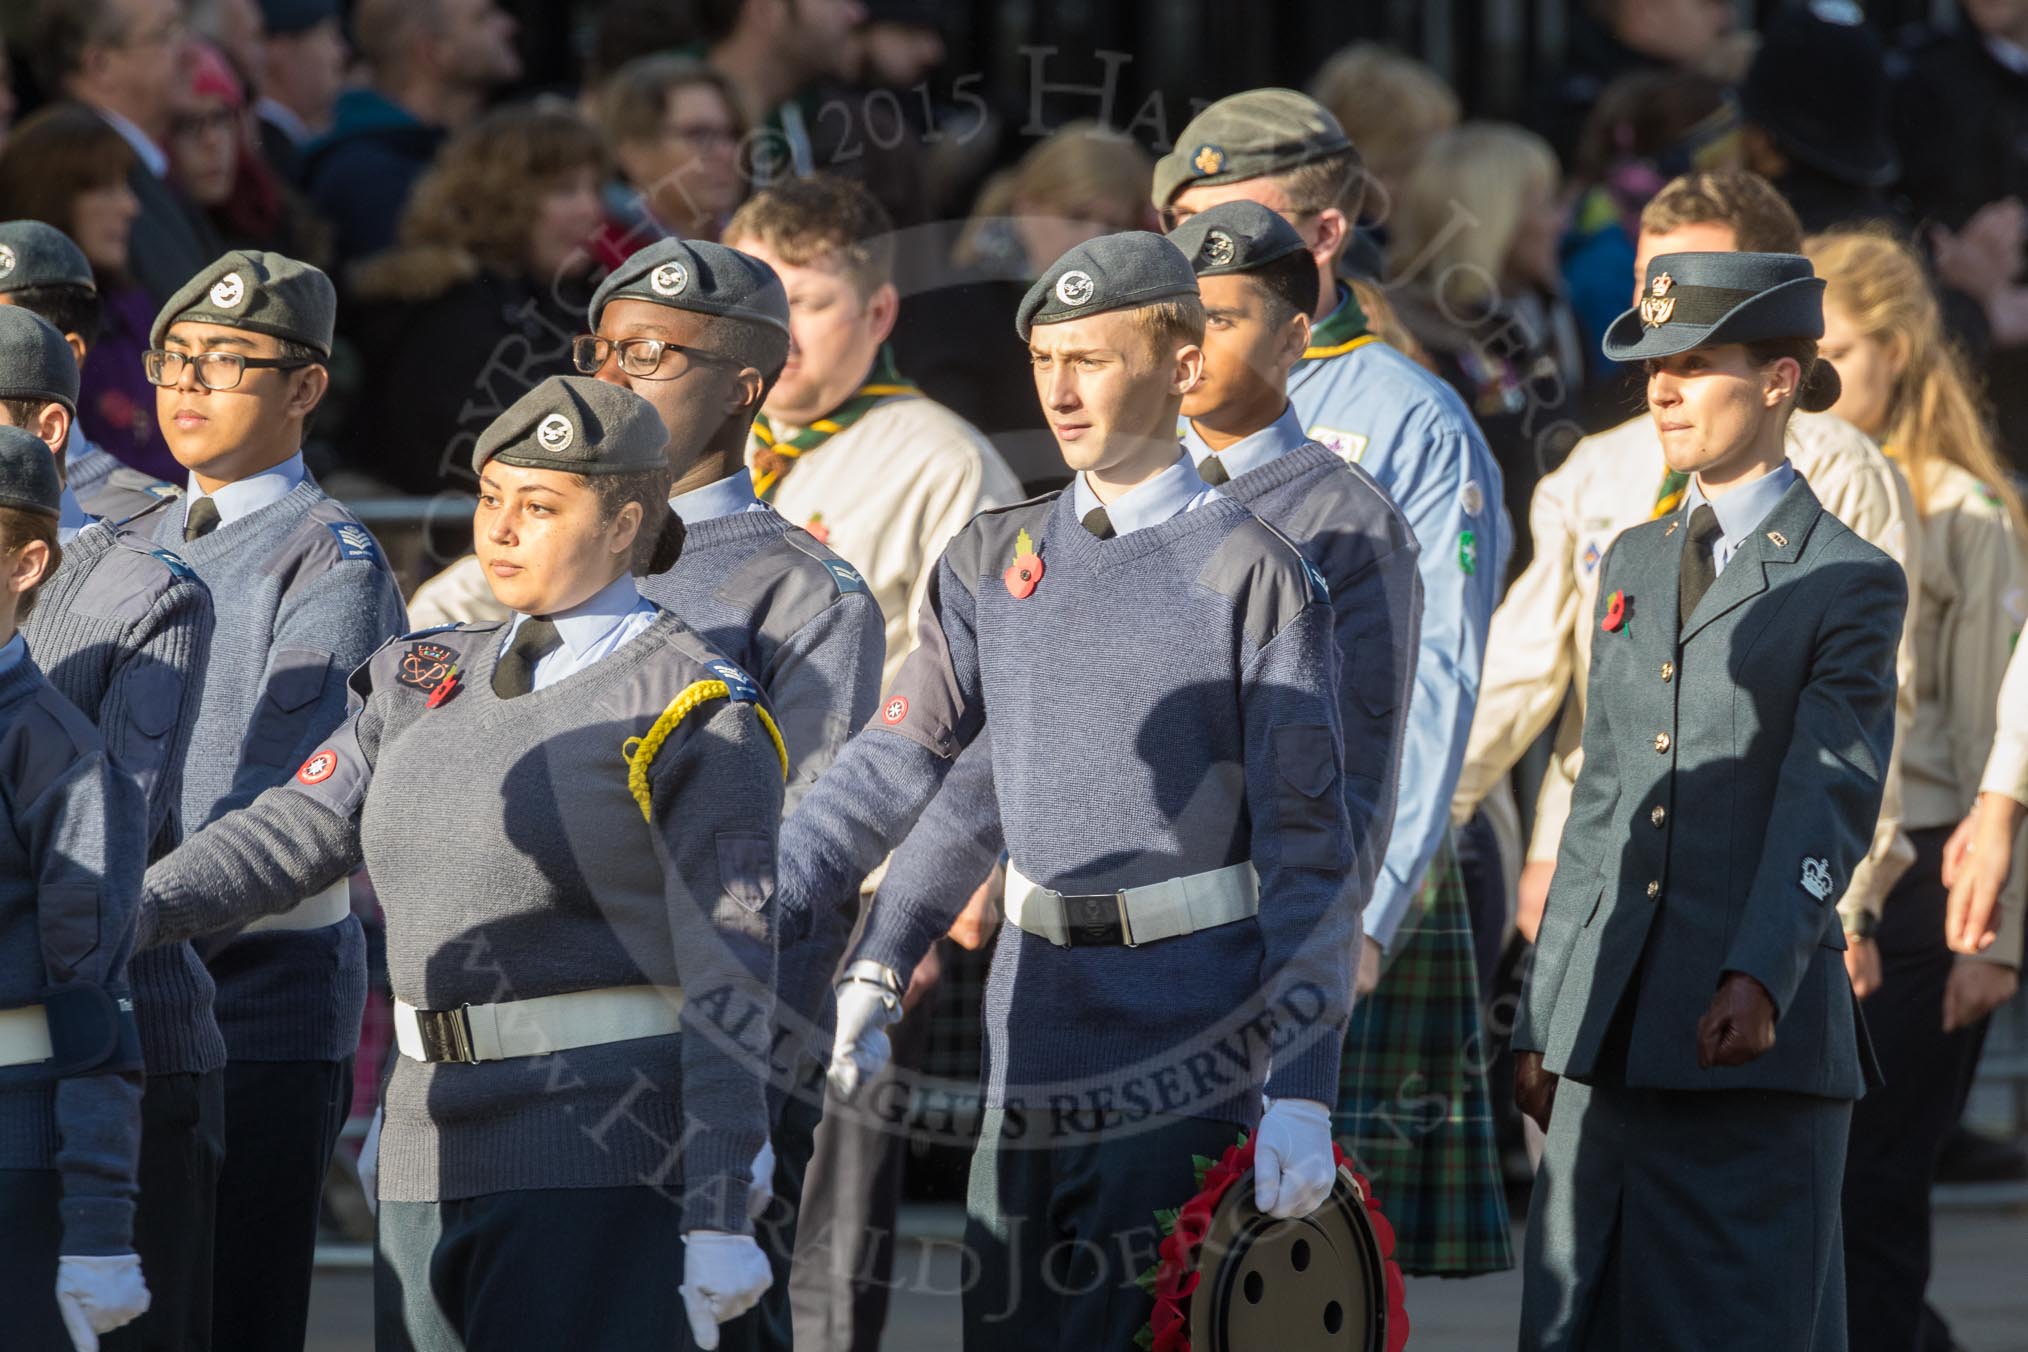 March Past, Remembrance Sunday at the Cenotaph 2016: M33 Scout Association.
Cenotaph, Whitehall, London SW1,
London,
Greater London,
United Kingdom,
on 13 November 2016 at 13:18, image #2838